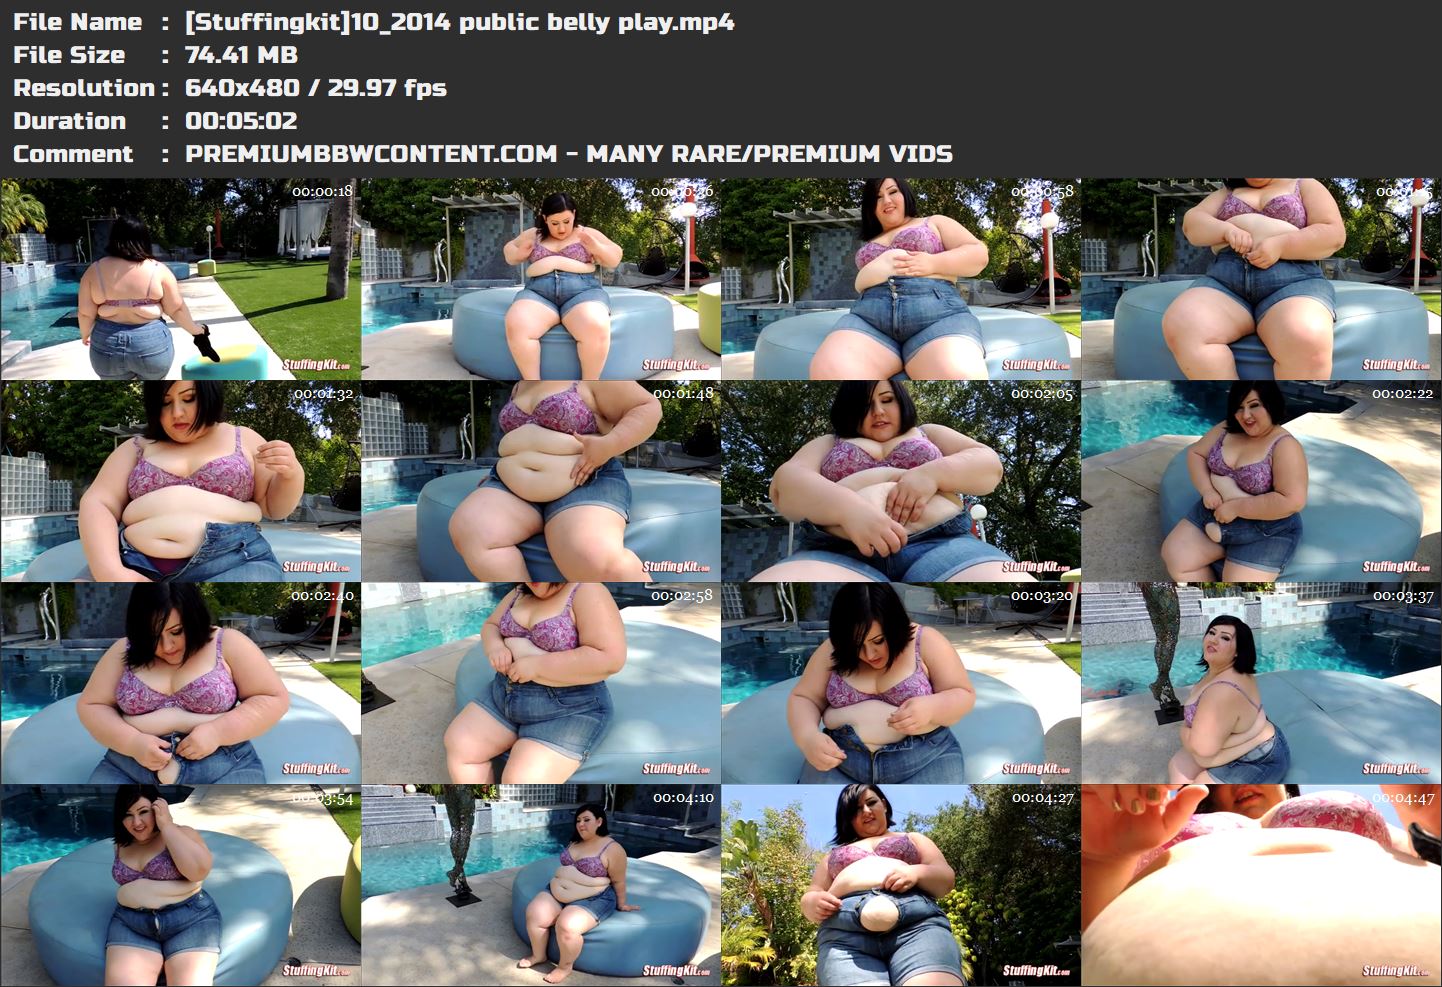 [Stuffingkit]10_2014 public belly play thumbnails